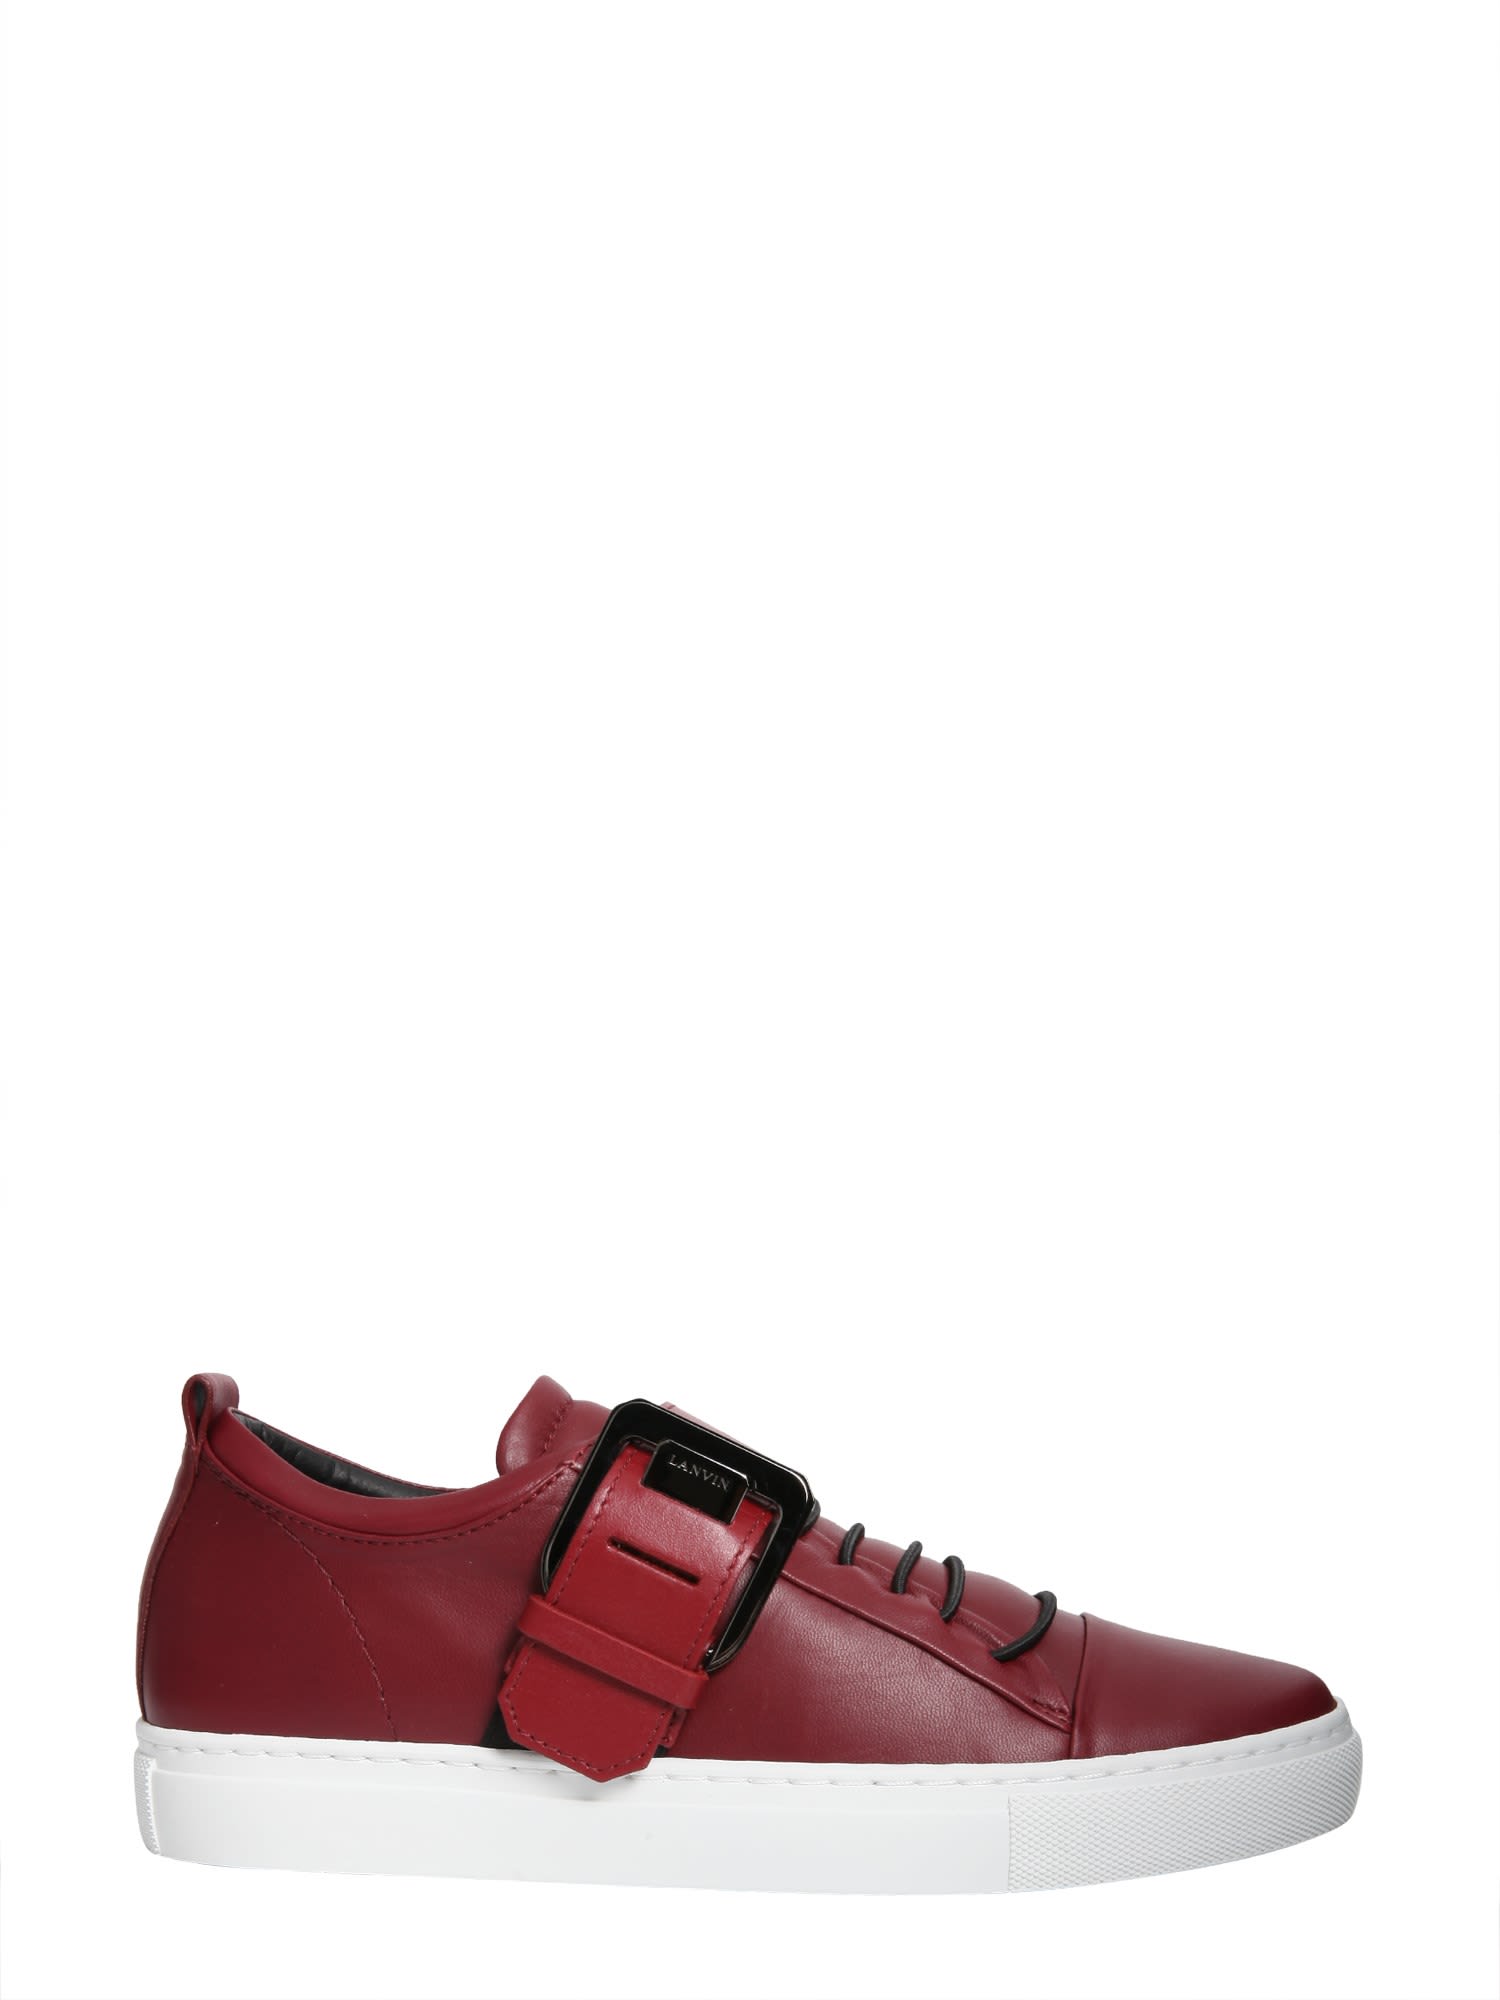 Lanvin Low-top Square Buckle Sneakers